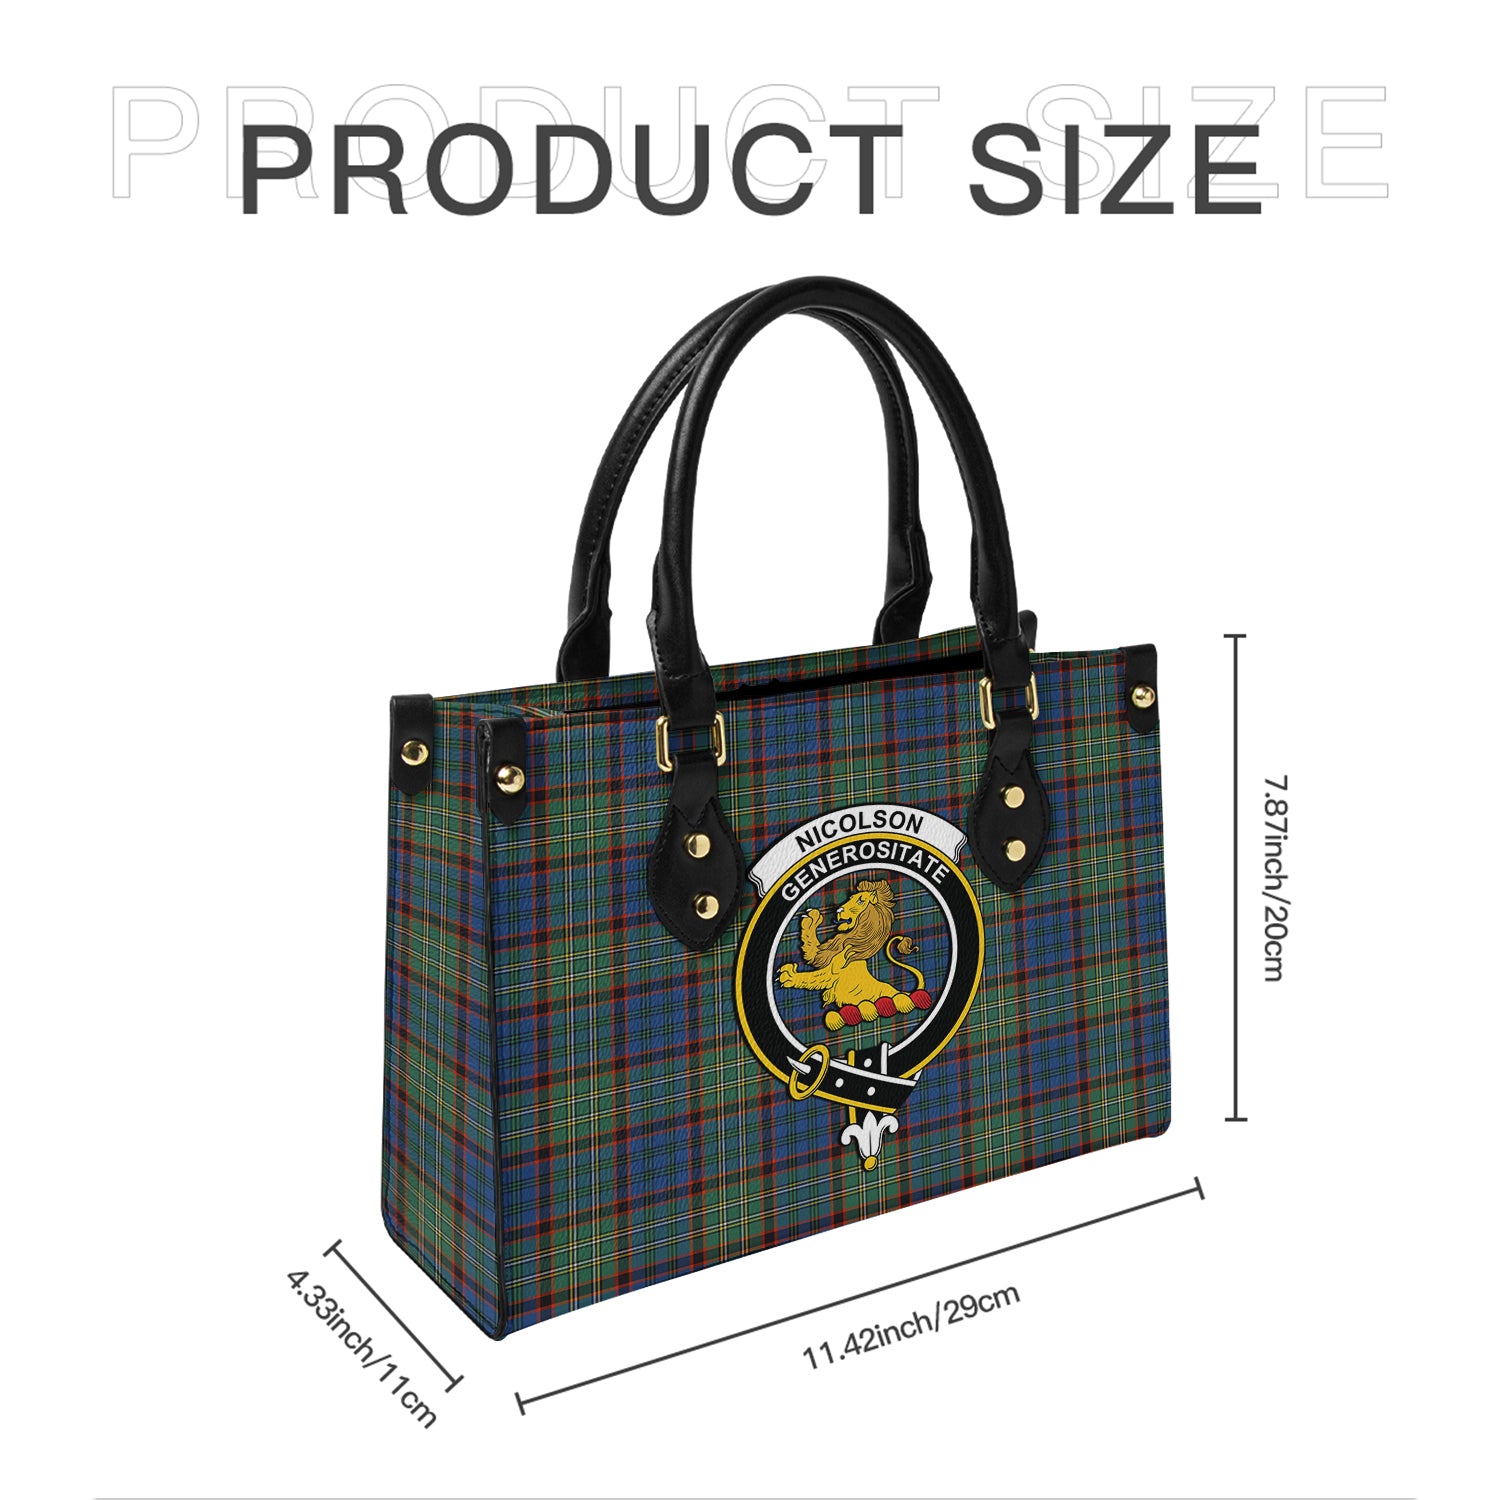 nicolson-hunting-ancient-tartan-leather-bag-with-family-crest